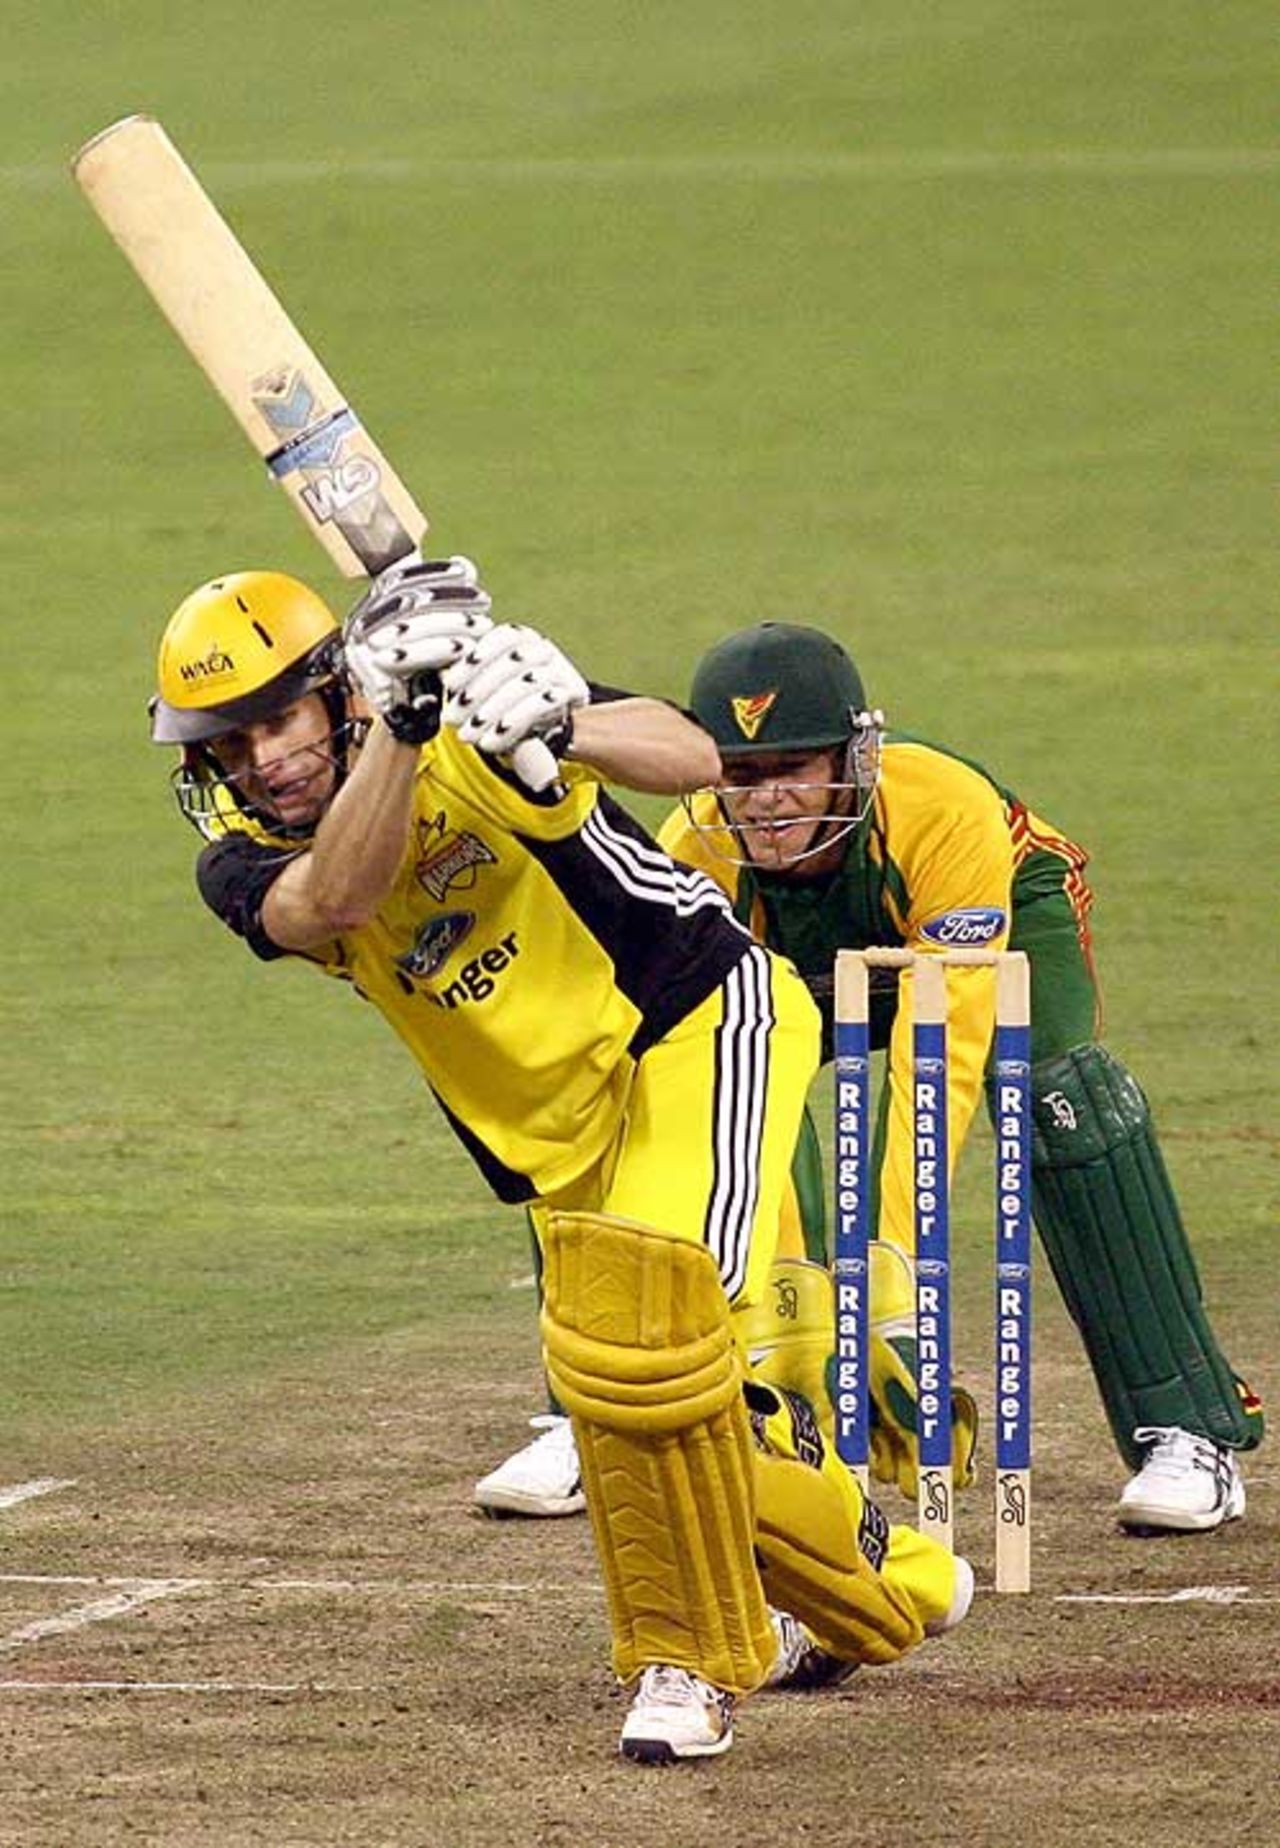 Adam Voges forged a match-winning stand with Theo Doropoulos, Western Australia v Tasmania, Ford Ranger Cup, Perth, October 24, 2008